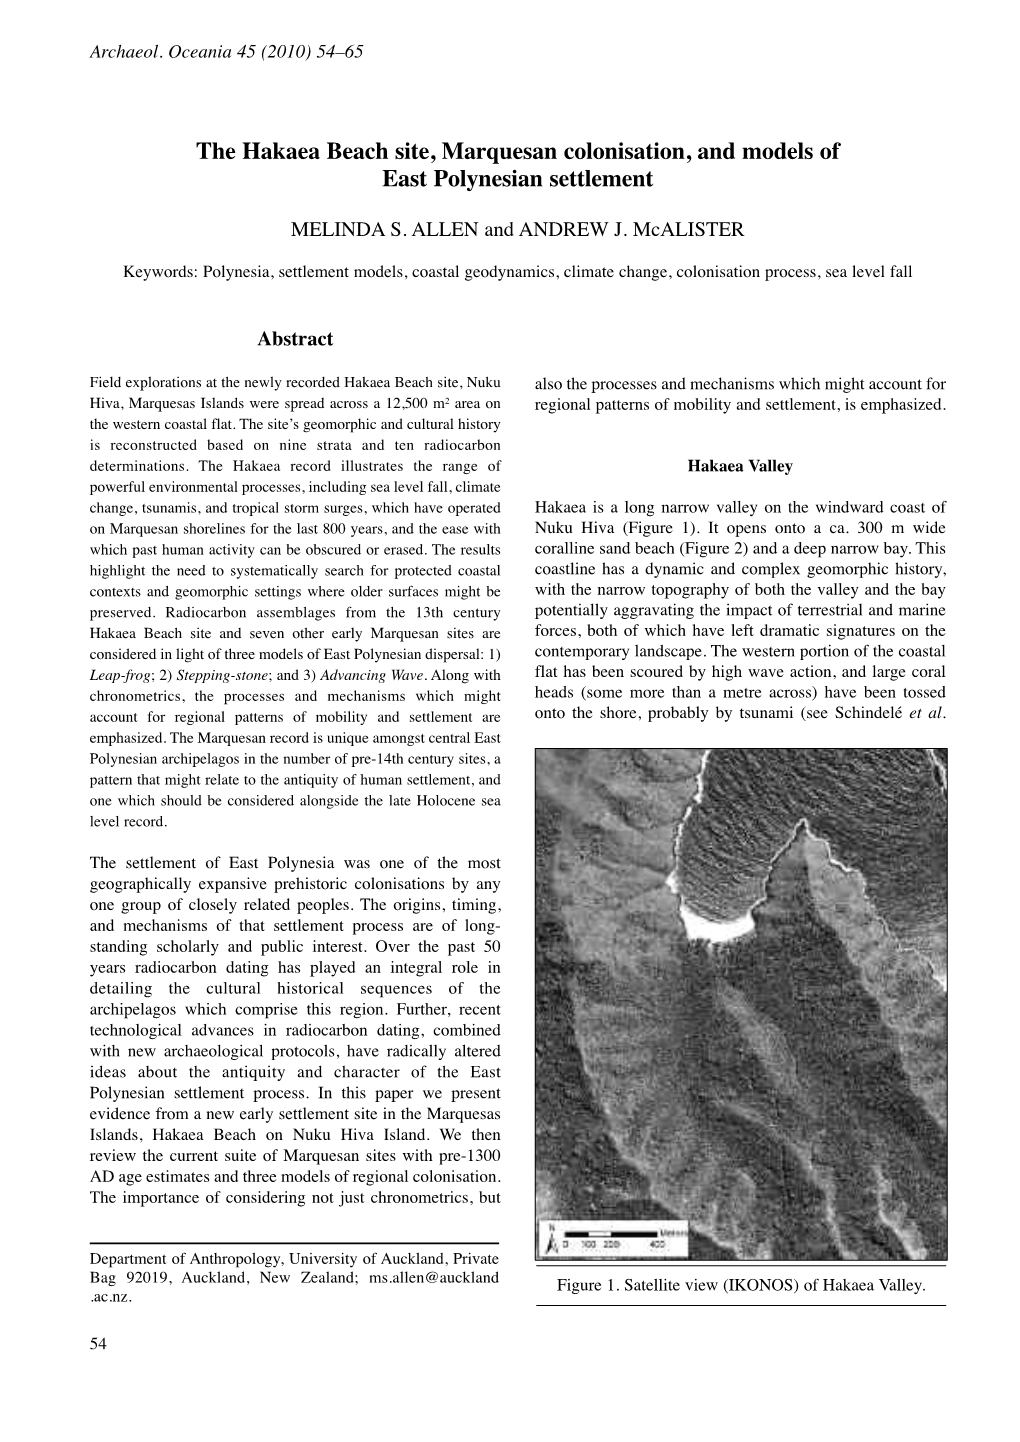 The Hakaea Beach Site, Marquesan Colonisation, and Models of East Polynesian Settlement